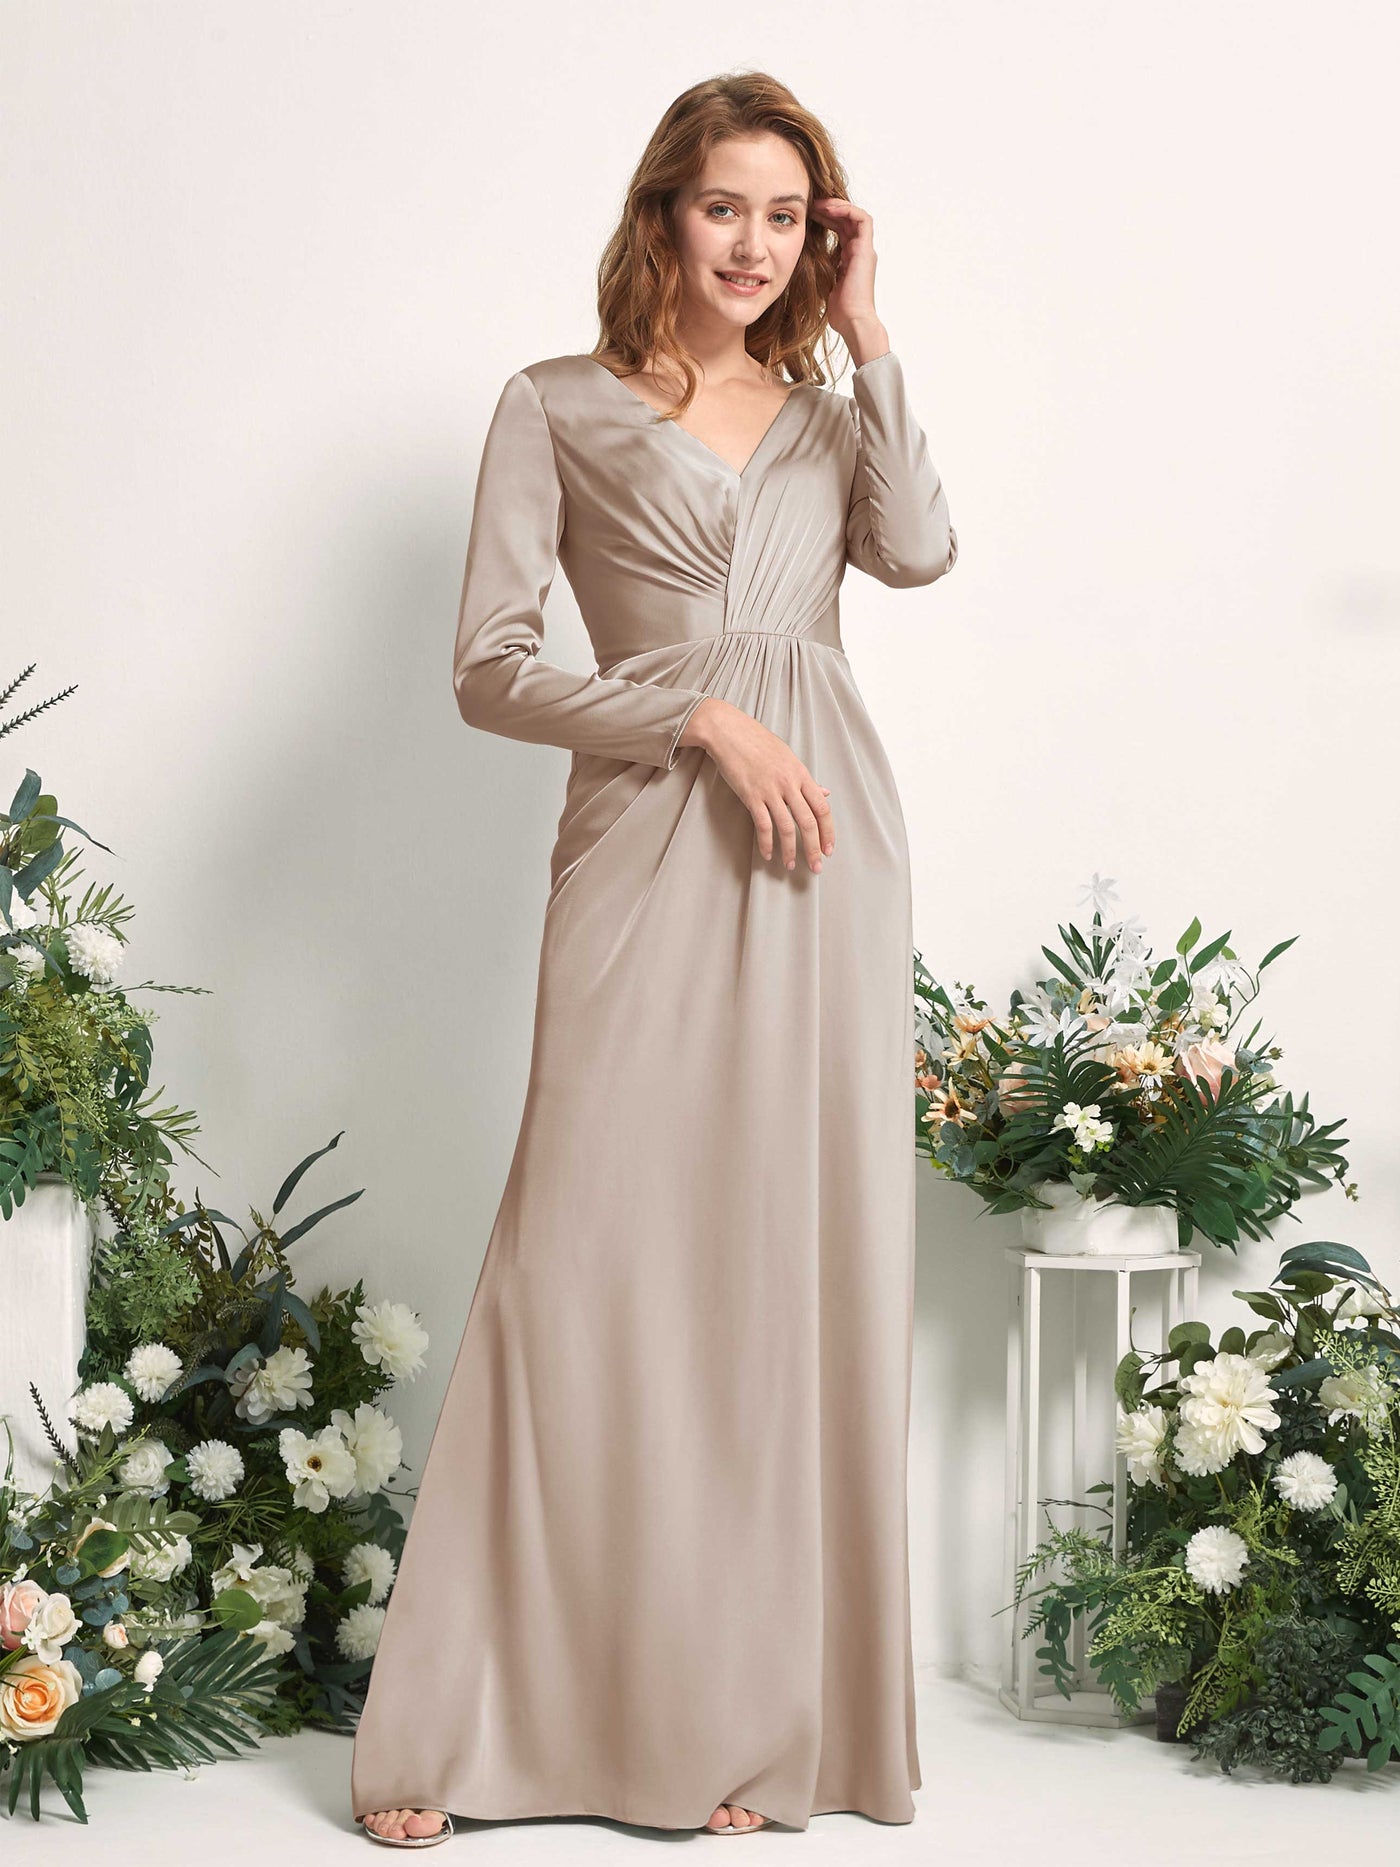 Taupe Bridesmaid Dresses Bridesmaid Dress A-line Satin V-neck Full Length Long Sleeves Wedding Party Dress (80225802)#color_taupe